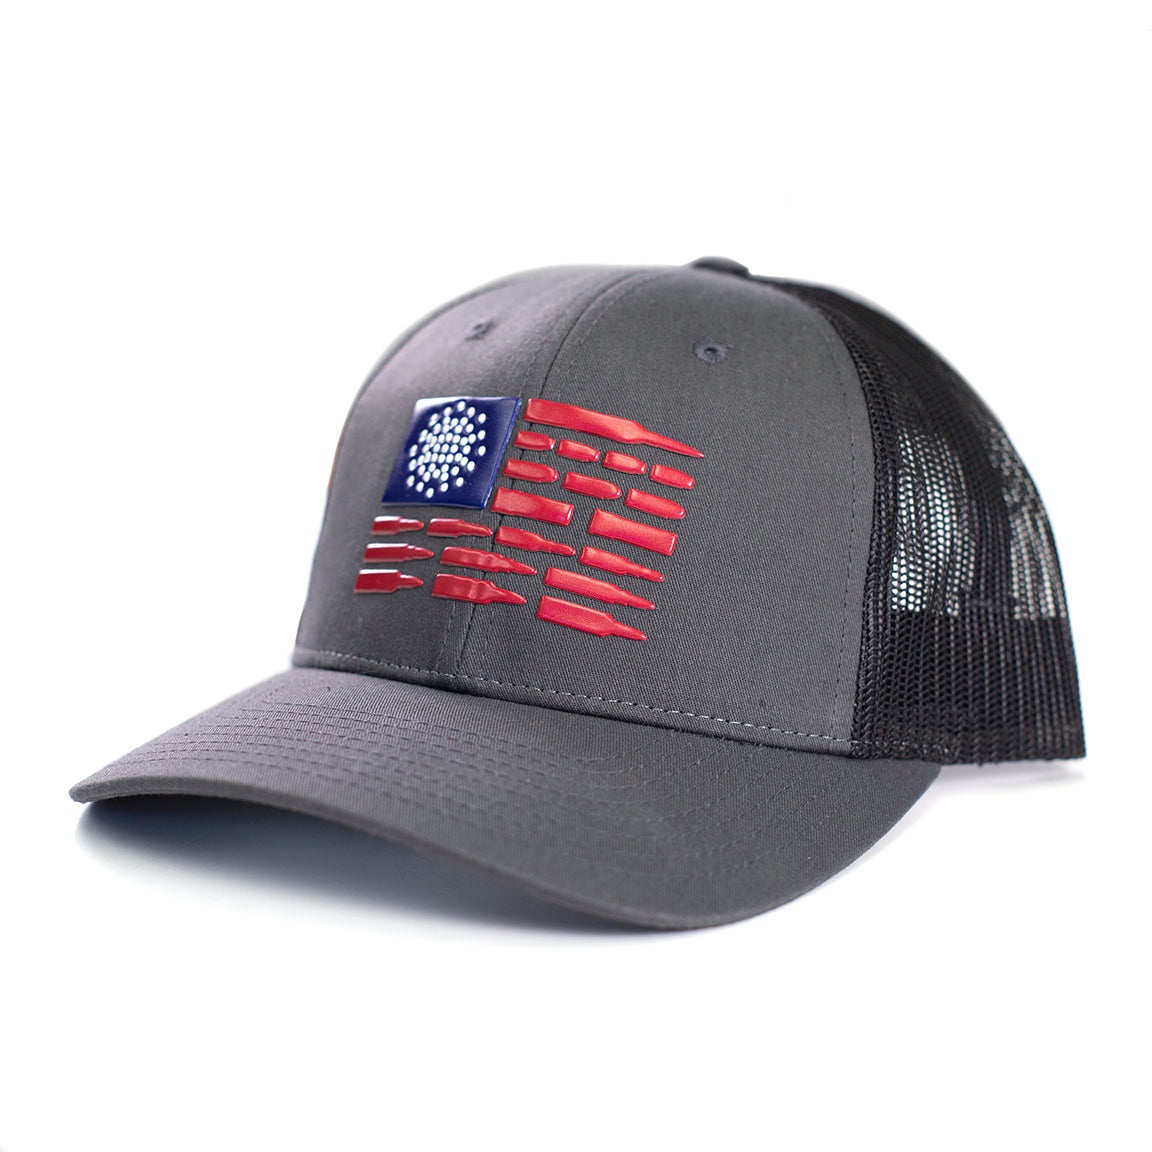 Kevin's Ammo Yard Flag Trucker Cap-Hats-Charcoal/Black-Kevin's Fine Outdoor Gear & Apparel